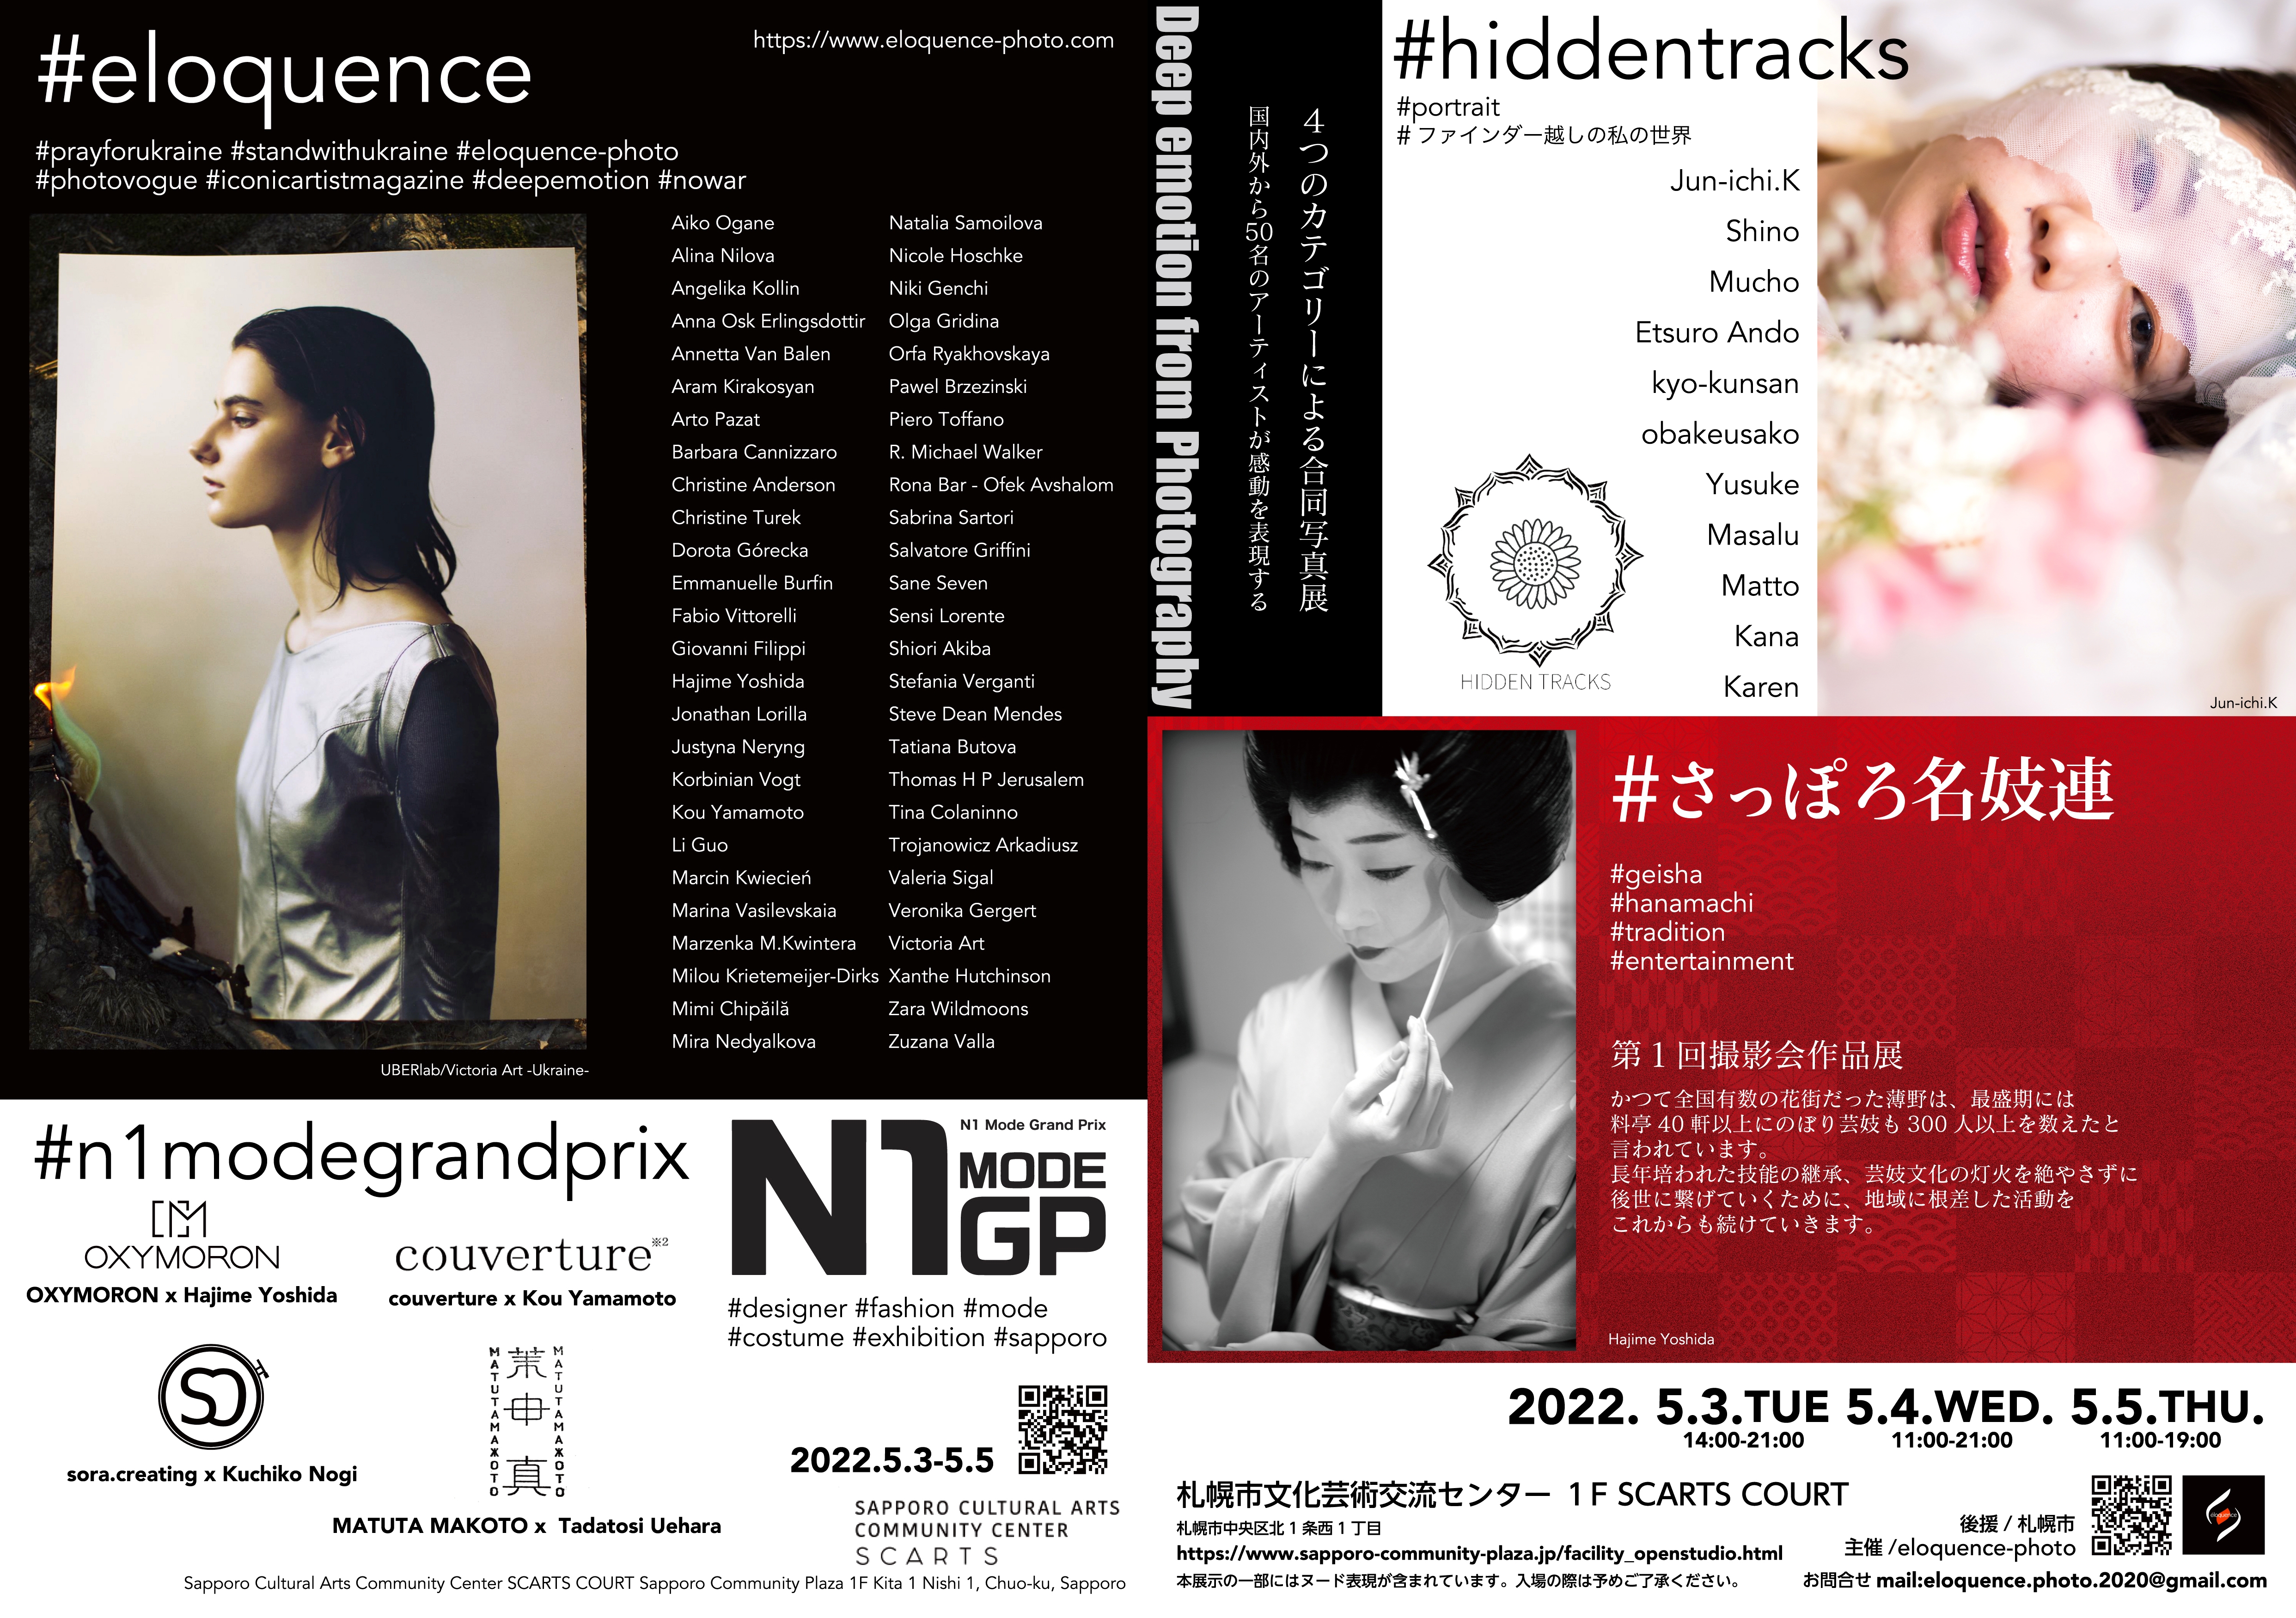 eloquence エロカンス写真展【Deep emotion from photography】４つのカテゴリーによる合同写真展のイメージ